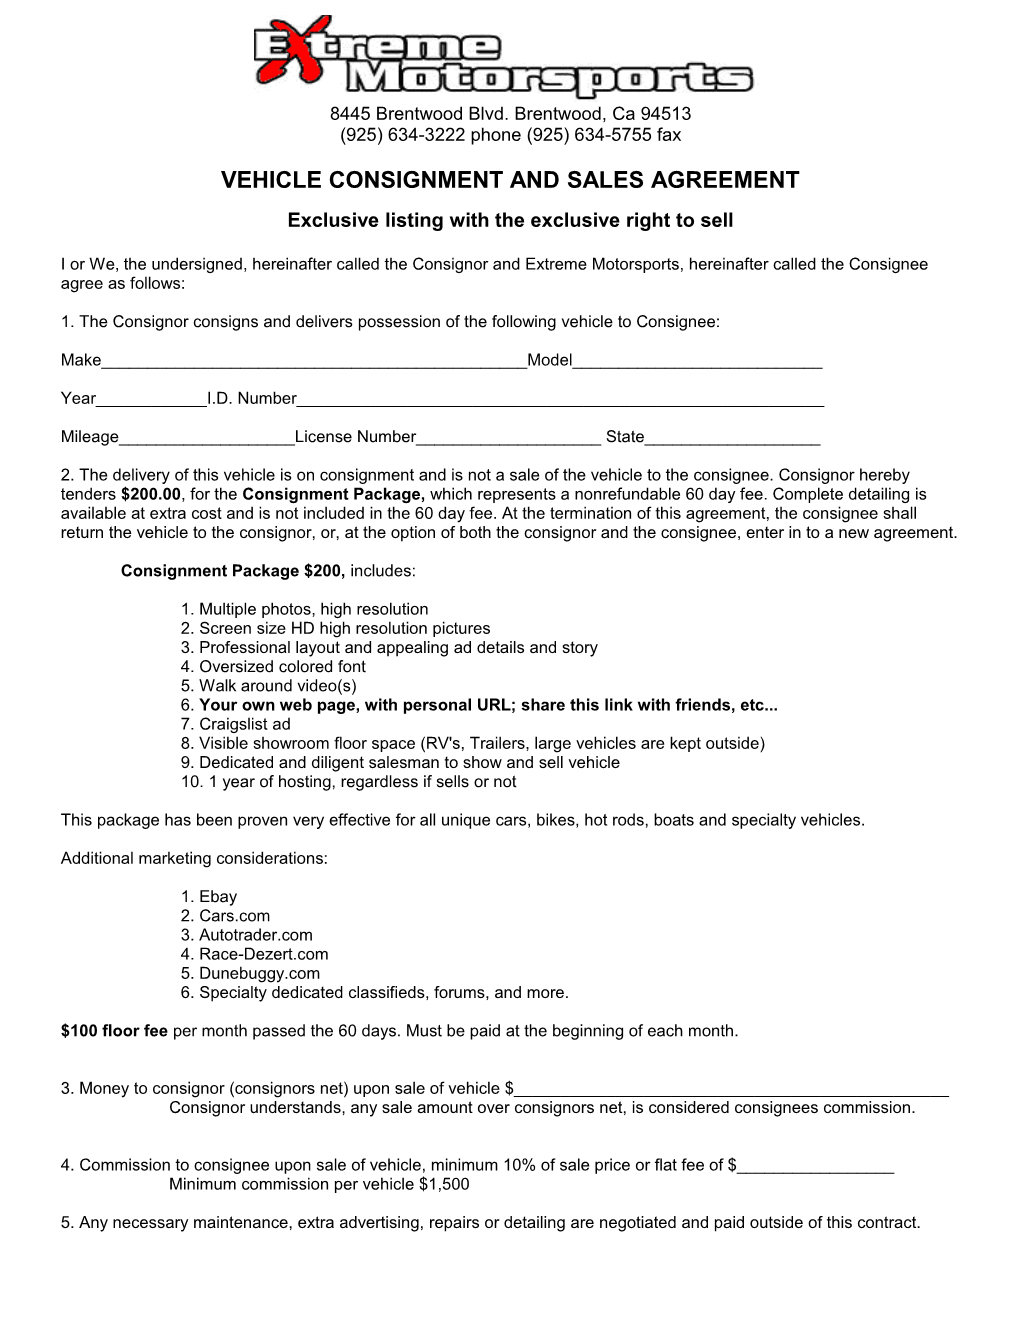 Vehicle Consignment and Sales Agreement